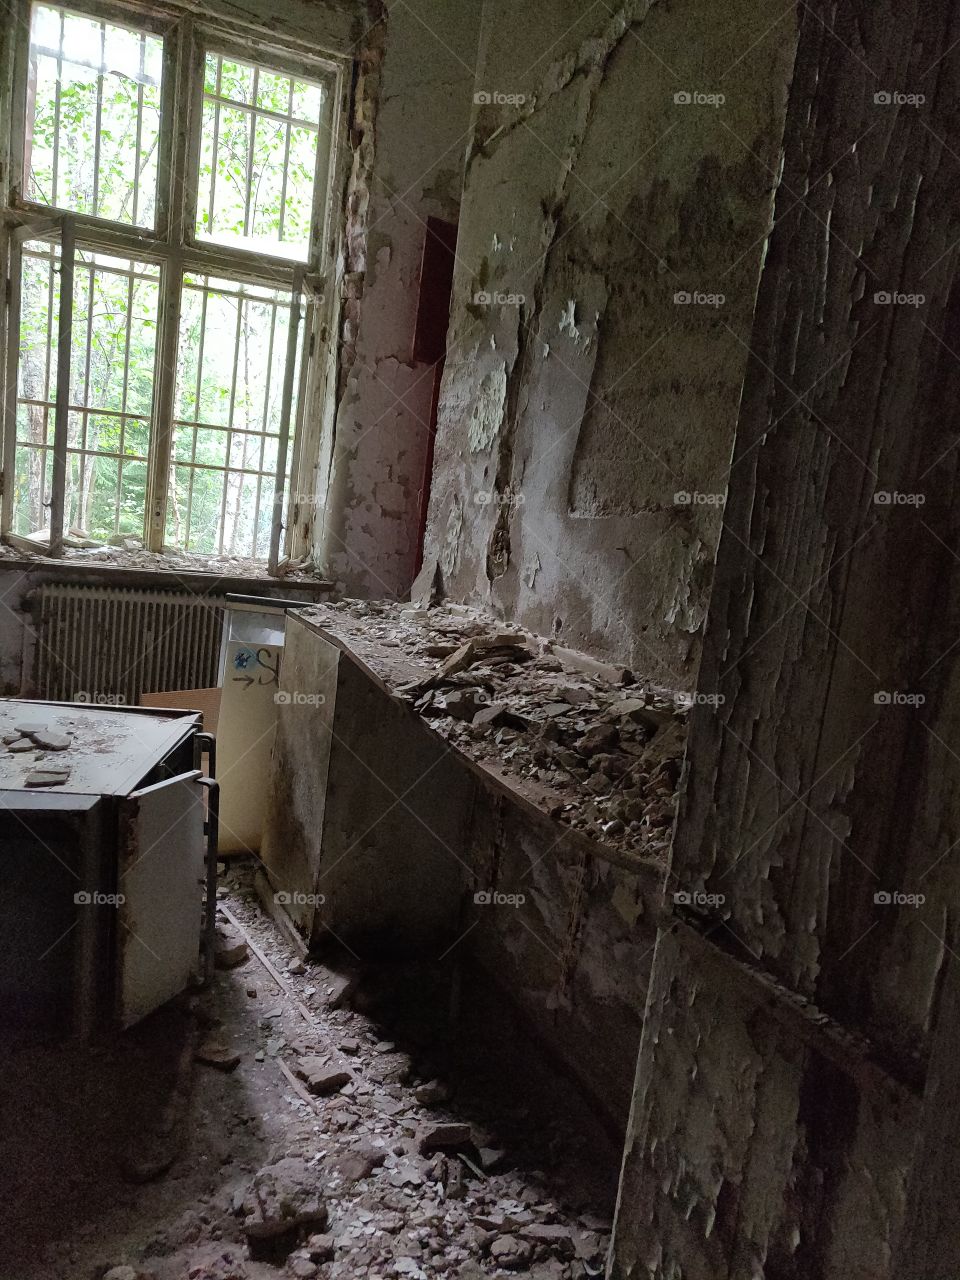 A picture of the abounded mental hospital located in Säter, Sweden.. This dark and mildly scary photo show us a small glimpse of the harsh past for the people that had lived there. Abounded in 1970 but yet still stands almost 50 years later..